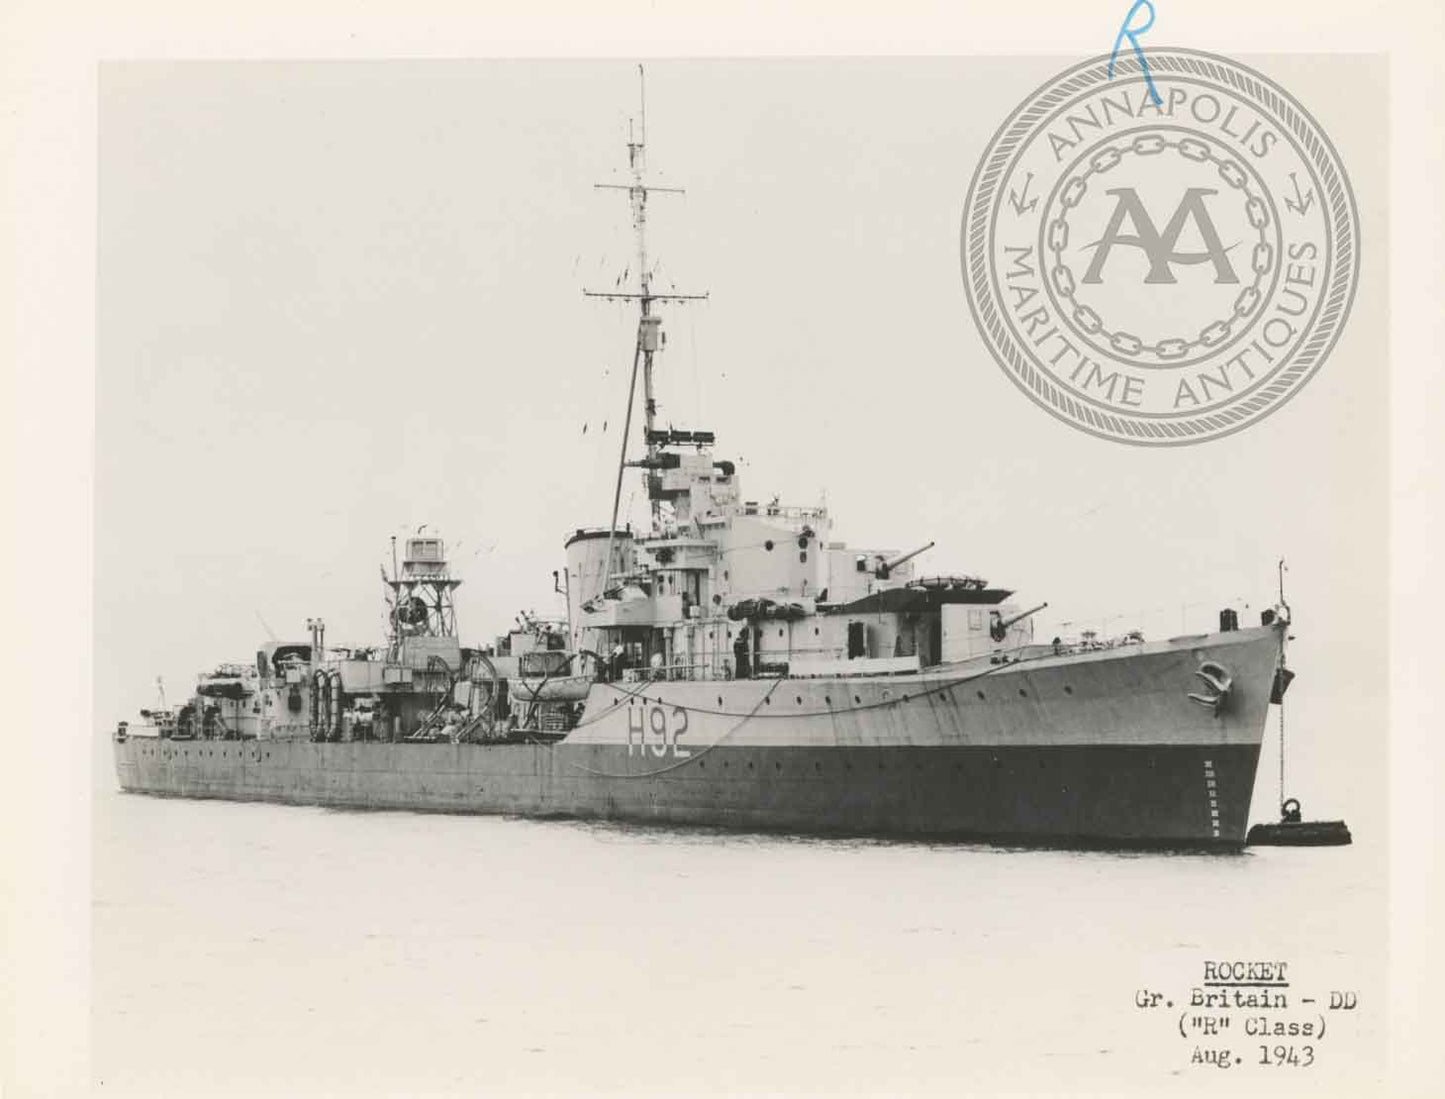 British and Canadian "R" Class Destroyers